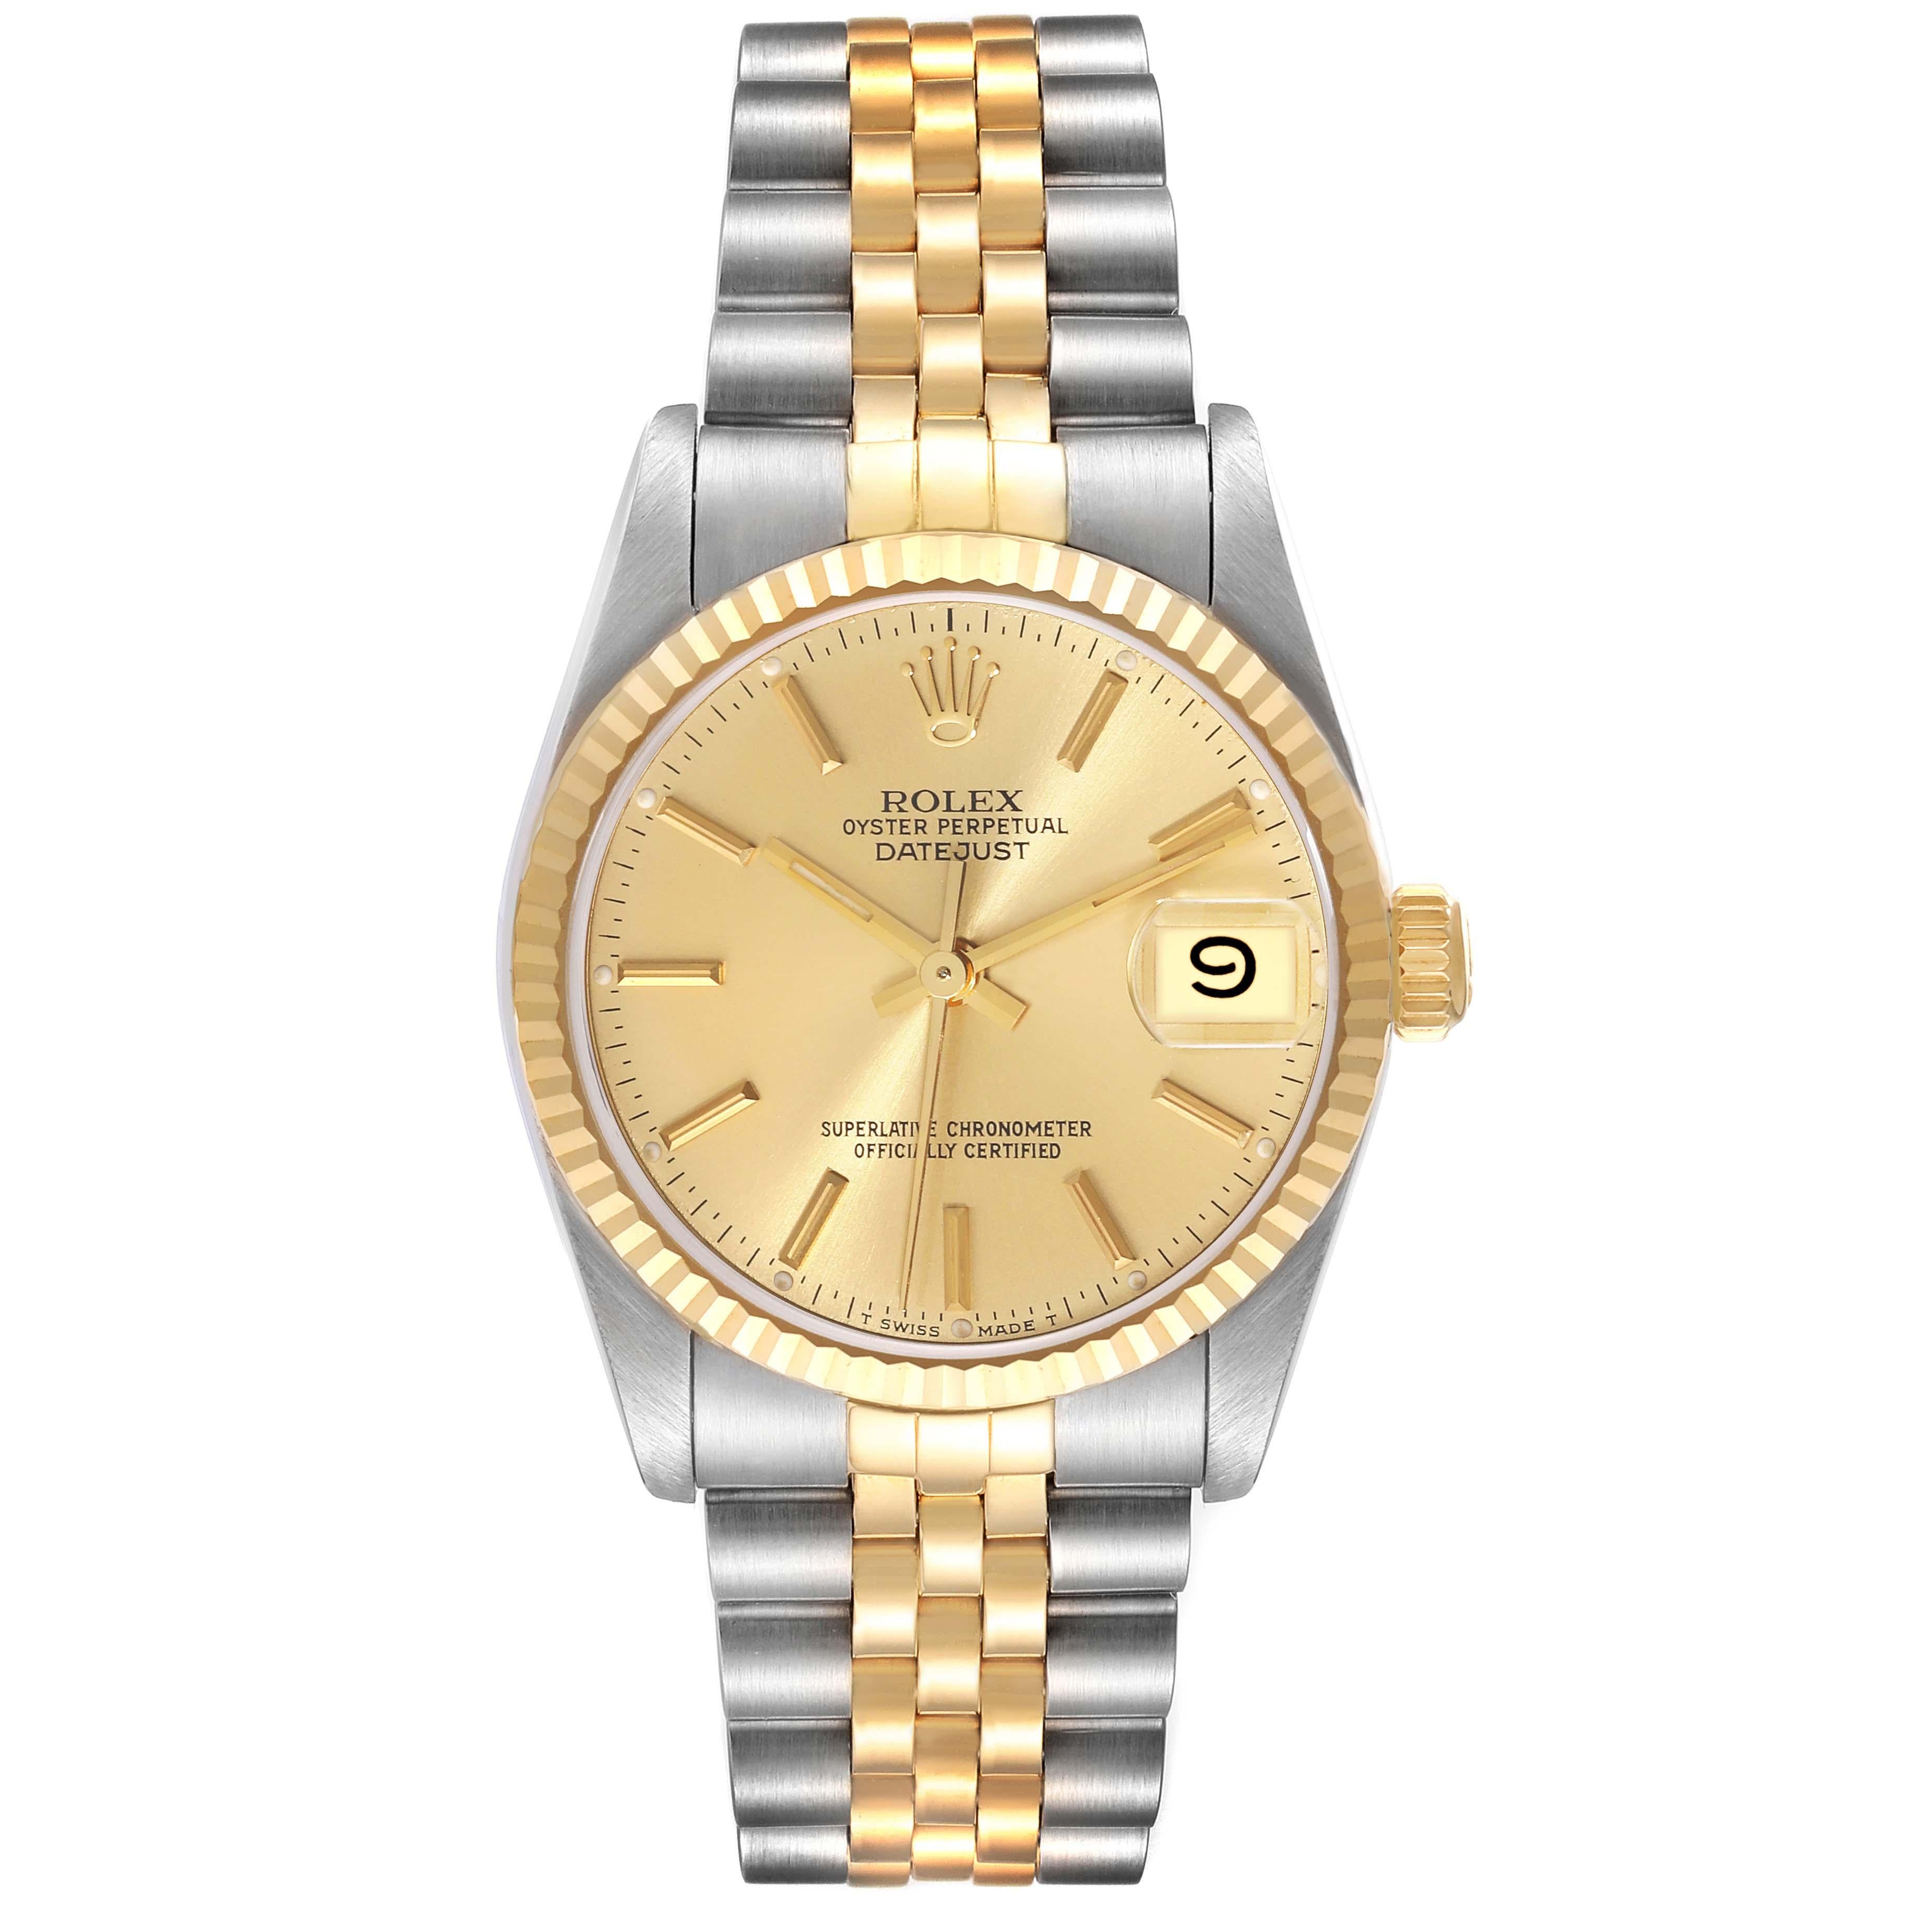 Rolex Datejust Midsize Steel Yellow Gold Ladies Watch 68273 Box Papers. Officially certified chronometer automatic self-winding movement. Stainless steel oyster case 31 mm in diameter. Rolex logo on an 18K yellow gold crown. 18k yellow gold fluted